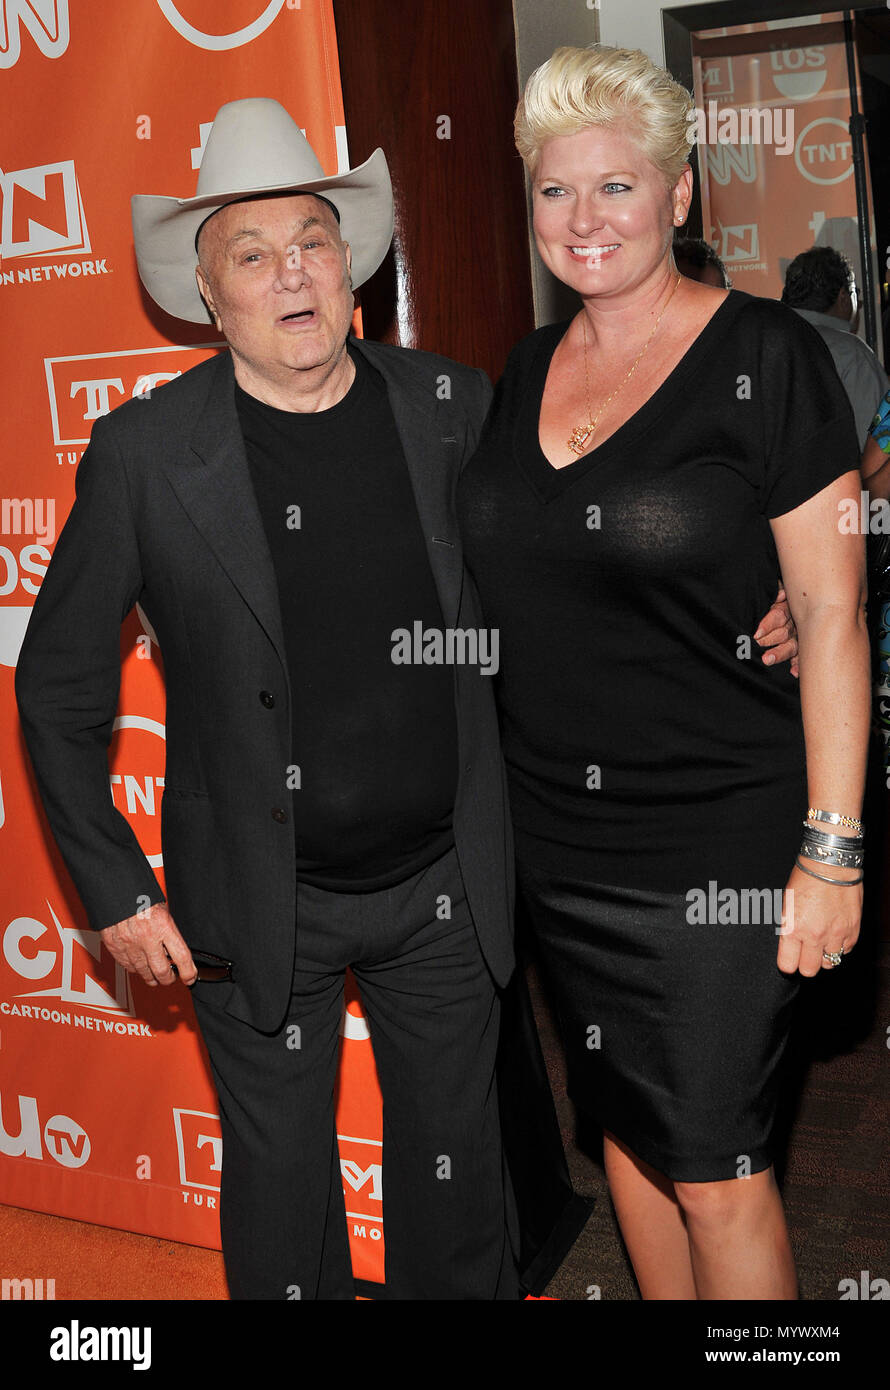 Tony Curtis and wife Jill Vandenberg Curtis  -  TNT tca summer 2008 at the Beverly Hilton in Los Angeles.  three quarters eye contact smile CurtisTony Jill Vandenberg Curtis 38  Event in Hollywood Life - California, Red Carpet Event, USA, Film Industry, Celebrities, Photography, Bestof, Arts Culture and Entertainment, Celebrities fashion, Best of, Hollywood Life, Event in Hollywood Life - California, Red Carpet and backstage, Music celebrities, Topix, Couple, family ( husband and wife ) and kids- Children, brothers and sisters inquiry tsuni@Gamma-USA.com, Credit Tsuni / USA, 2006 to 2009 Stock Photo